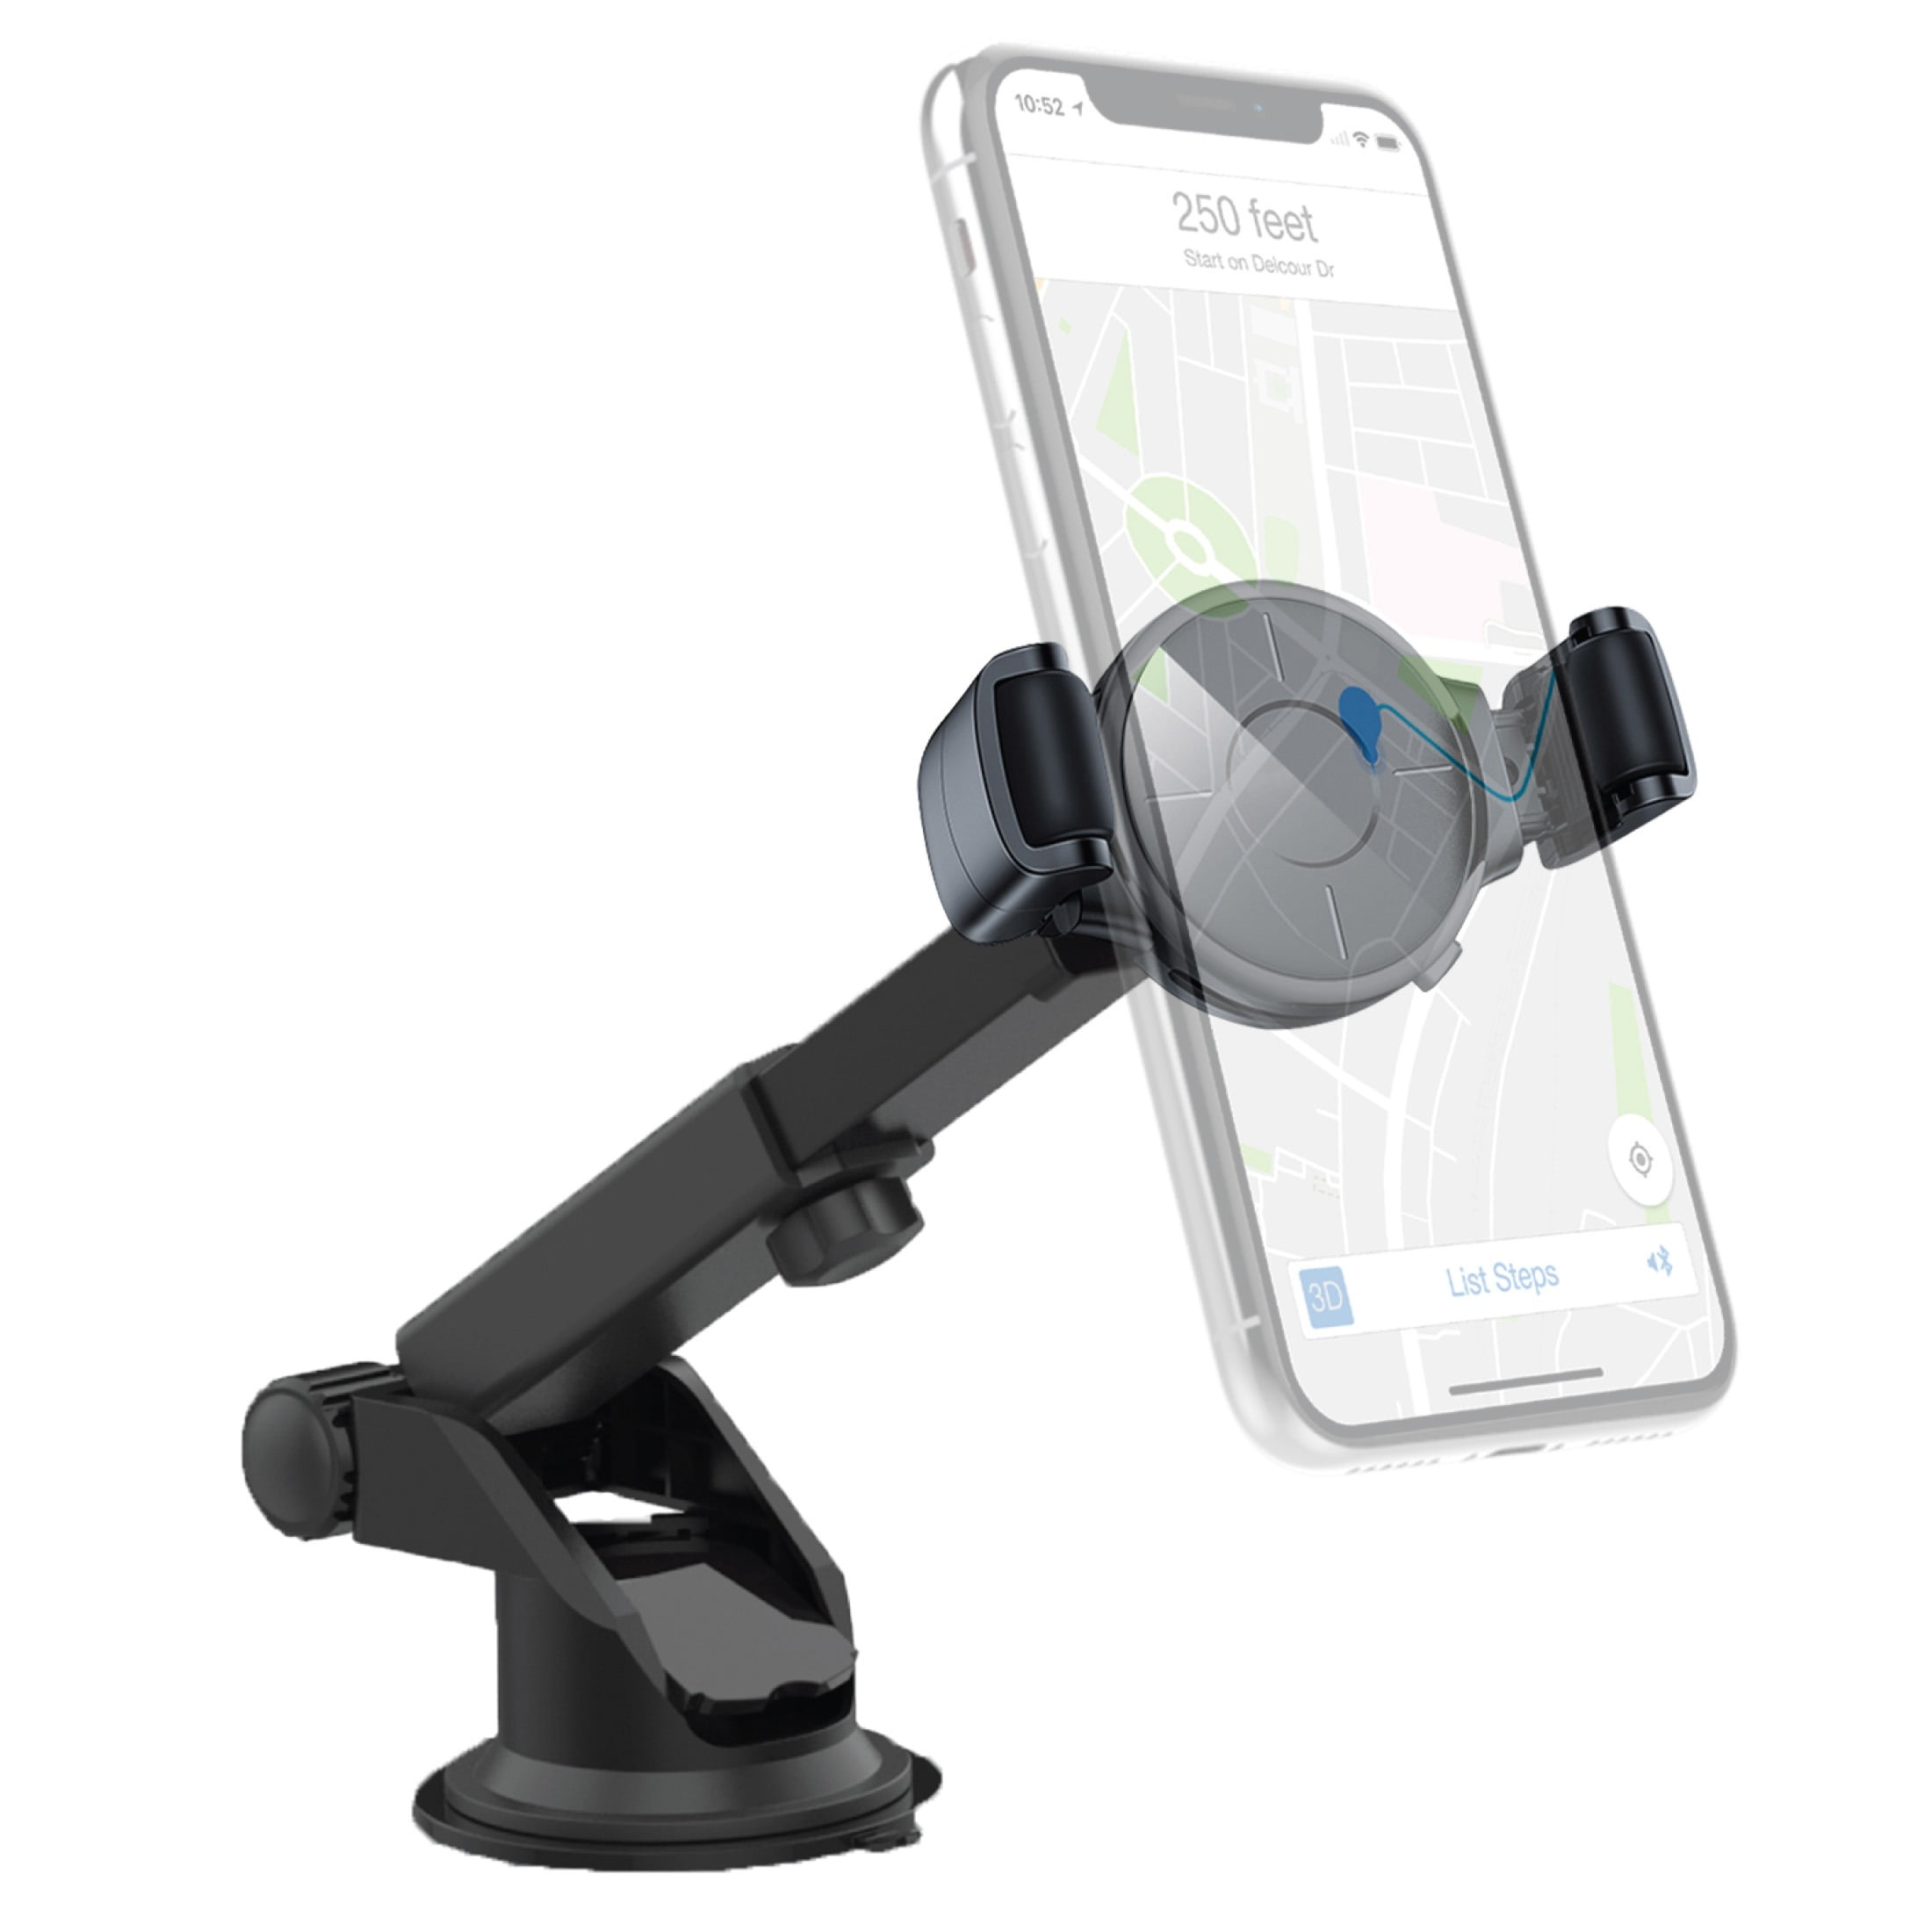 Premier Universal Cup Holder Cell Phone Mount with Flexible Arm